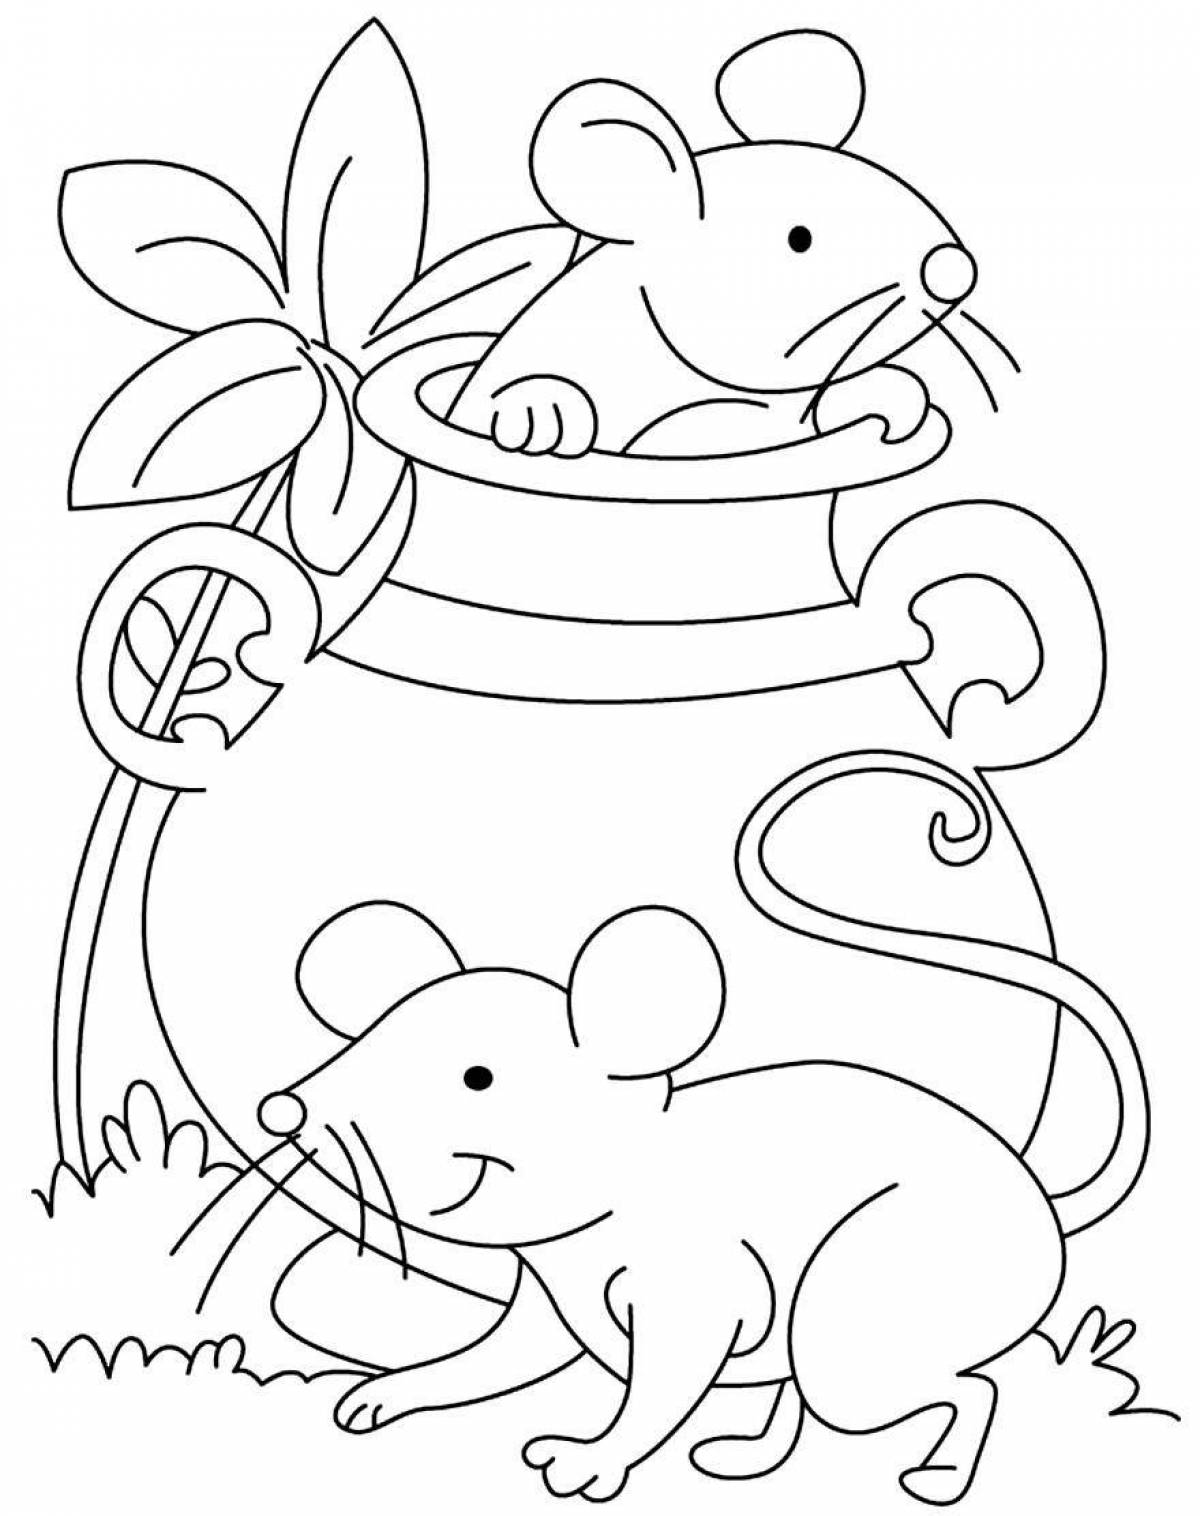 Magic mouse coloring book for kids